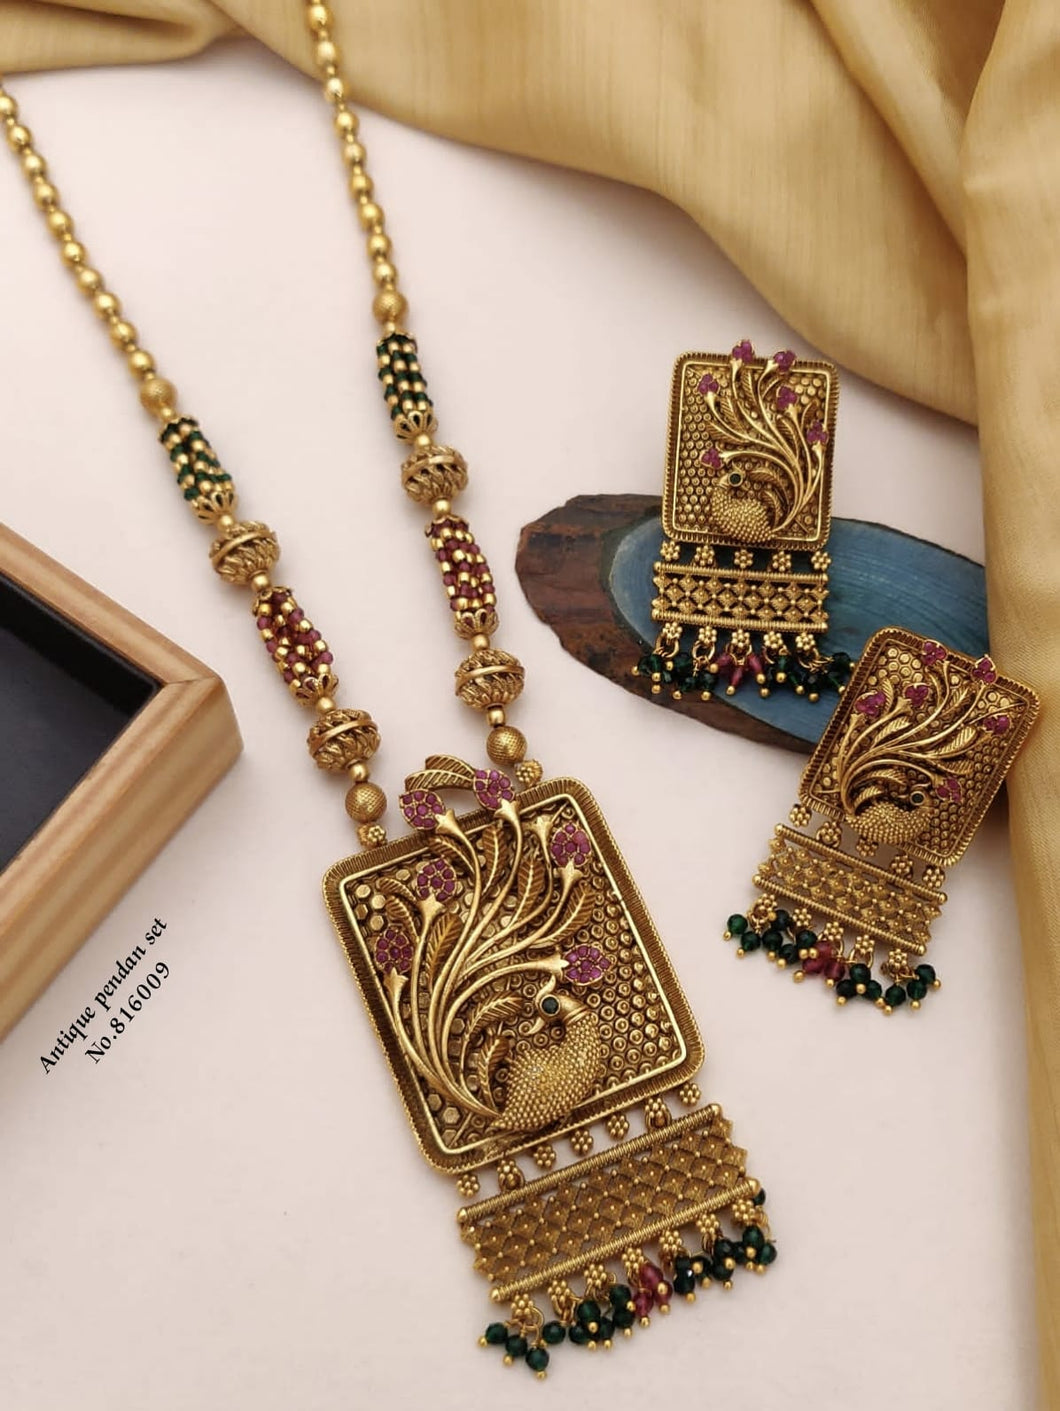 The Tribal Swag Jewelry